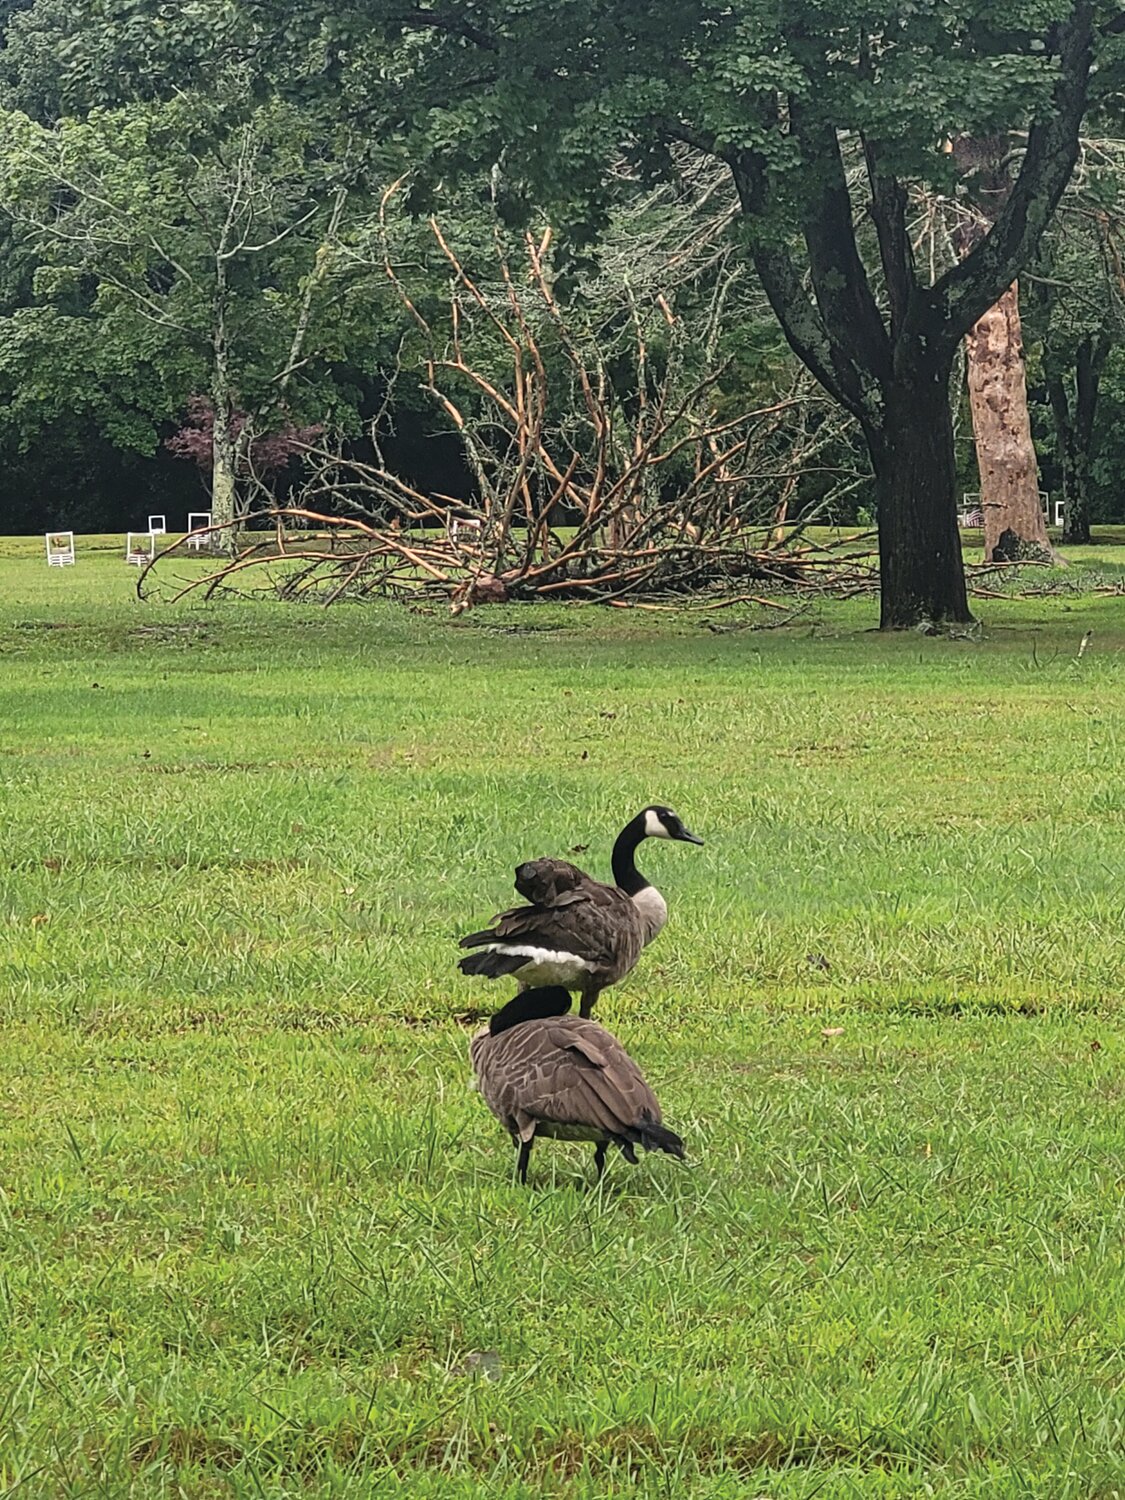 CALM AFTER: As the sun crept through the thick white cloud cover, a flock of Canada geese landed amid the cemetery’s scattered synthetic flowers and piles of broken wood.